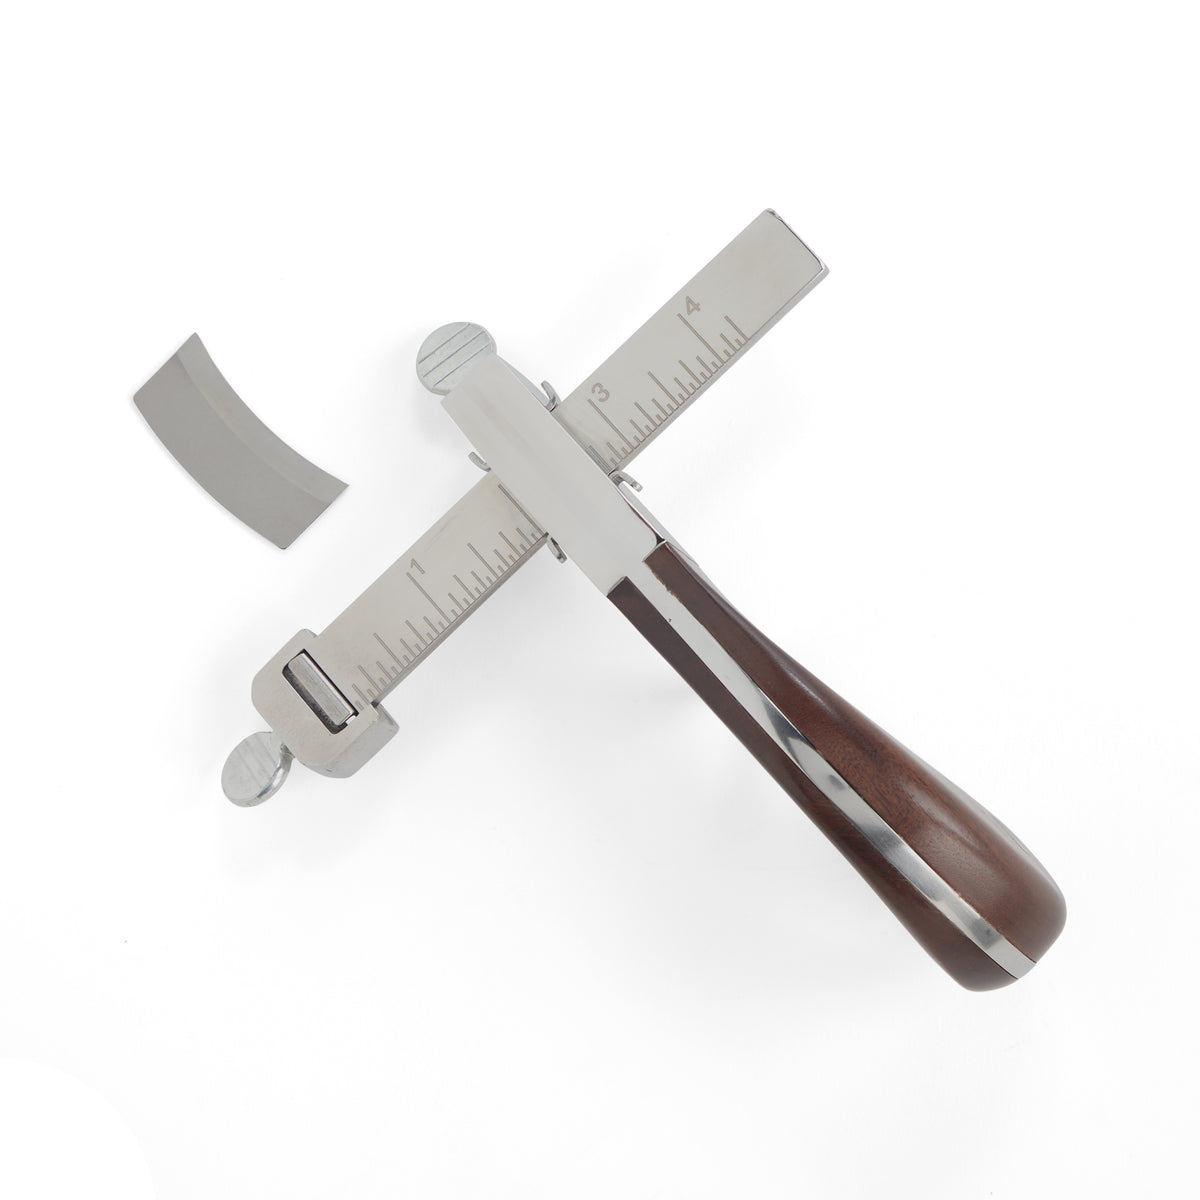 TandyPro Tools Draw Gauge from Tandy Leather